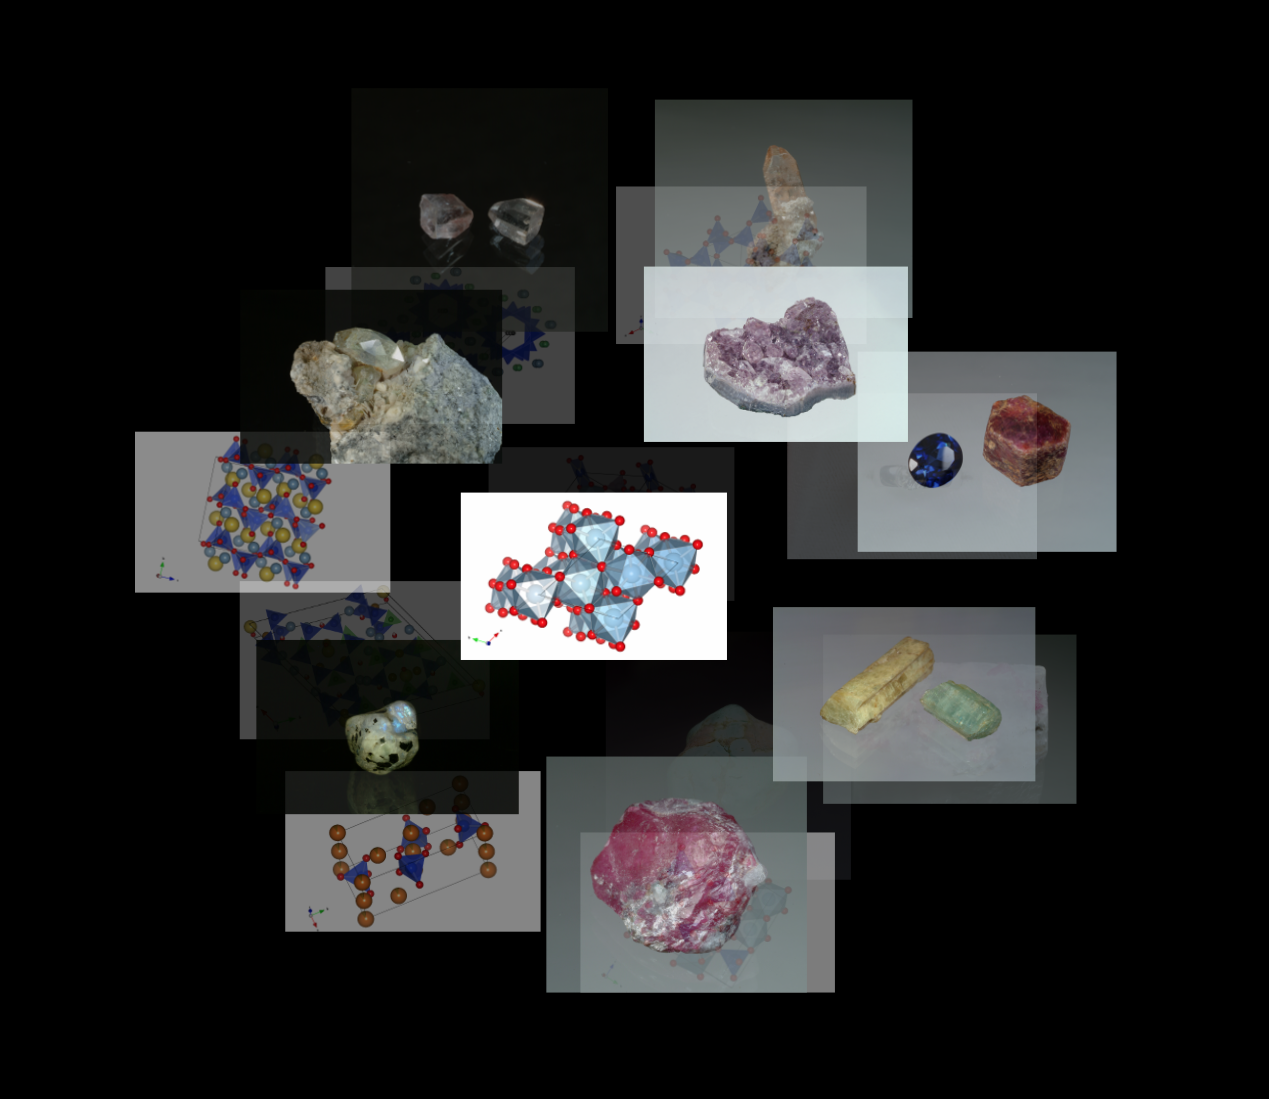 Photo and 3D structures of Birthstones